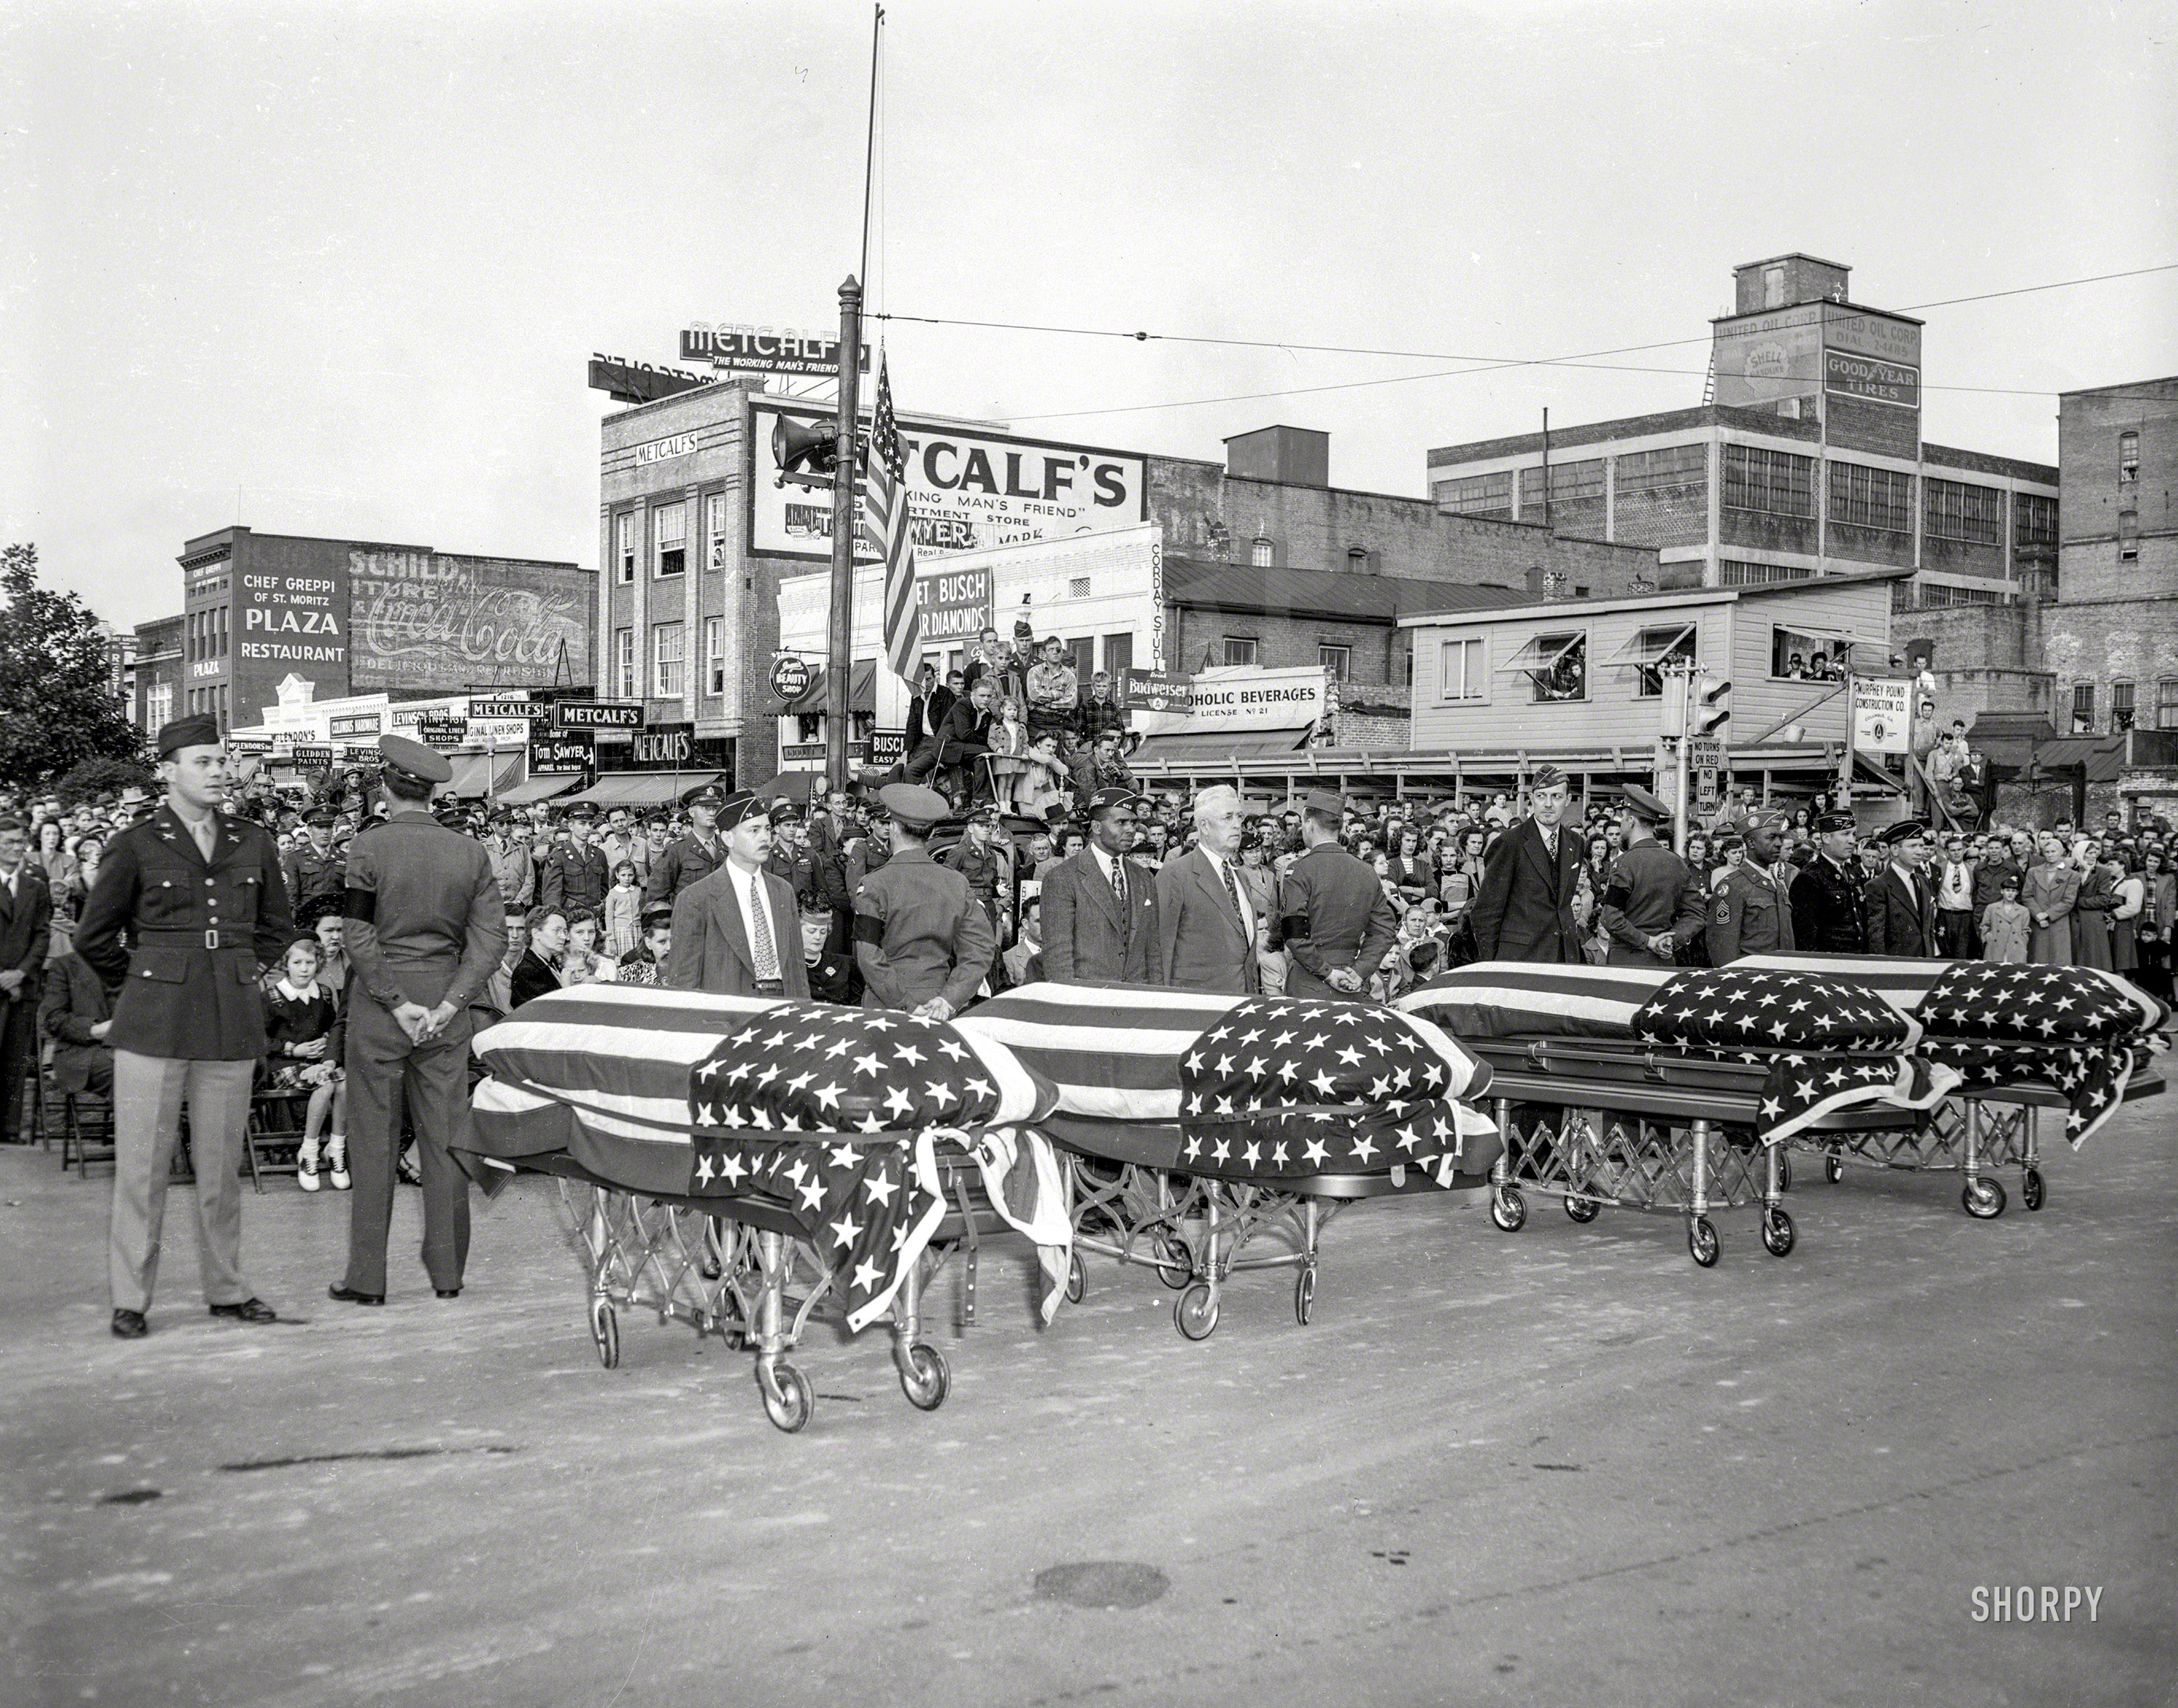 Columbus, Georgia, circa 1951. "Military funeral." One in a series of photos showing a quartet of flag-draped caskets. Georgia historians please fill in the blanks. 4x5 acetate negative, ex newspaper morgue. View full size.